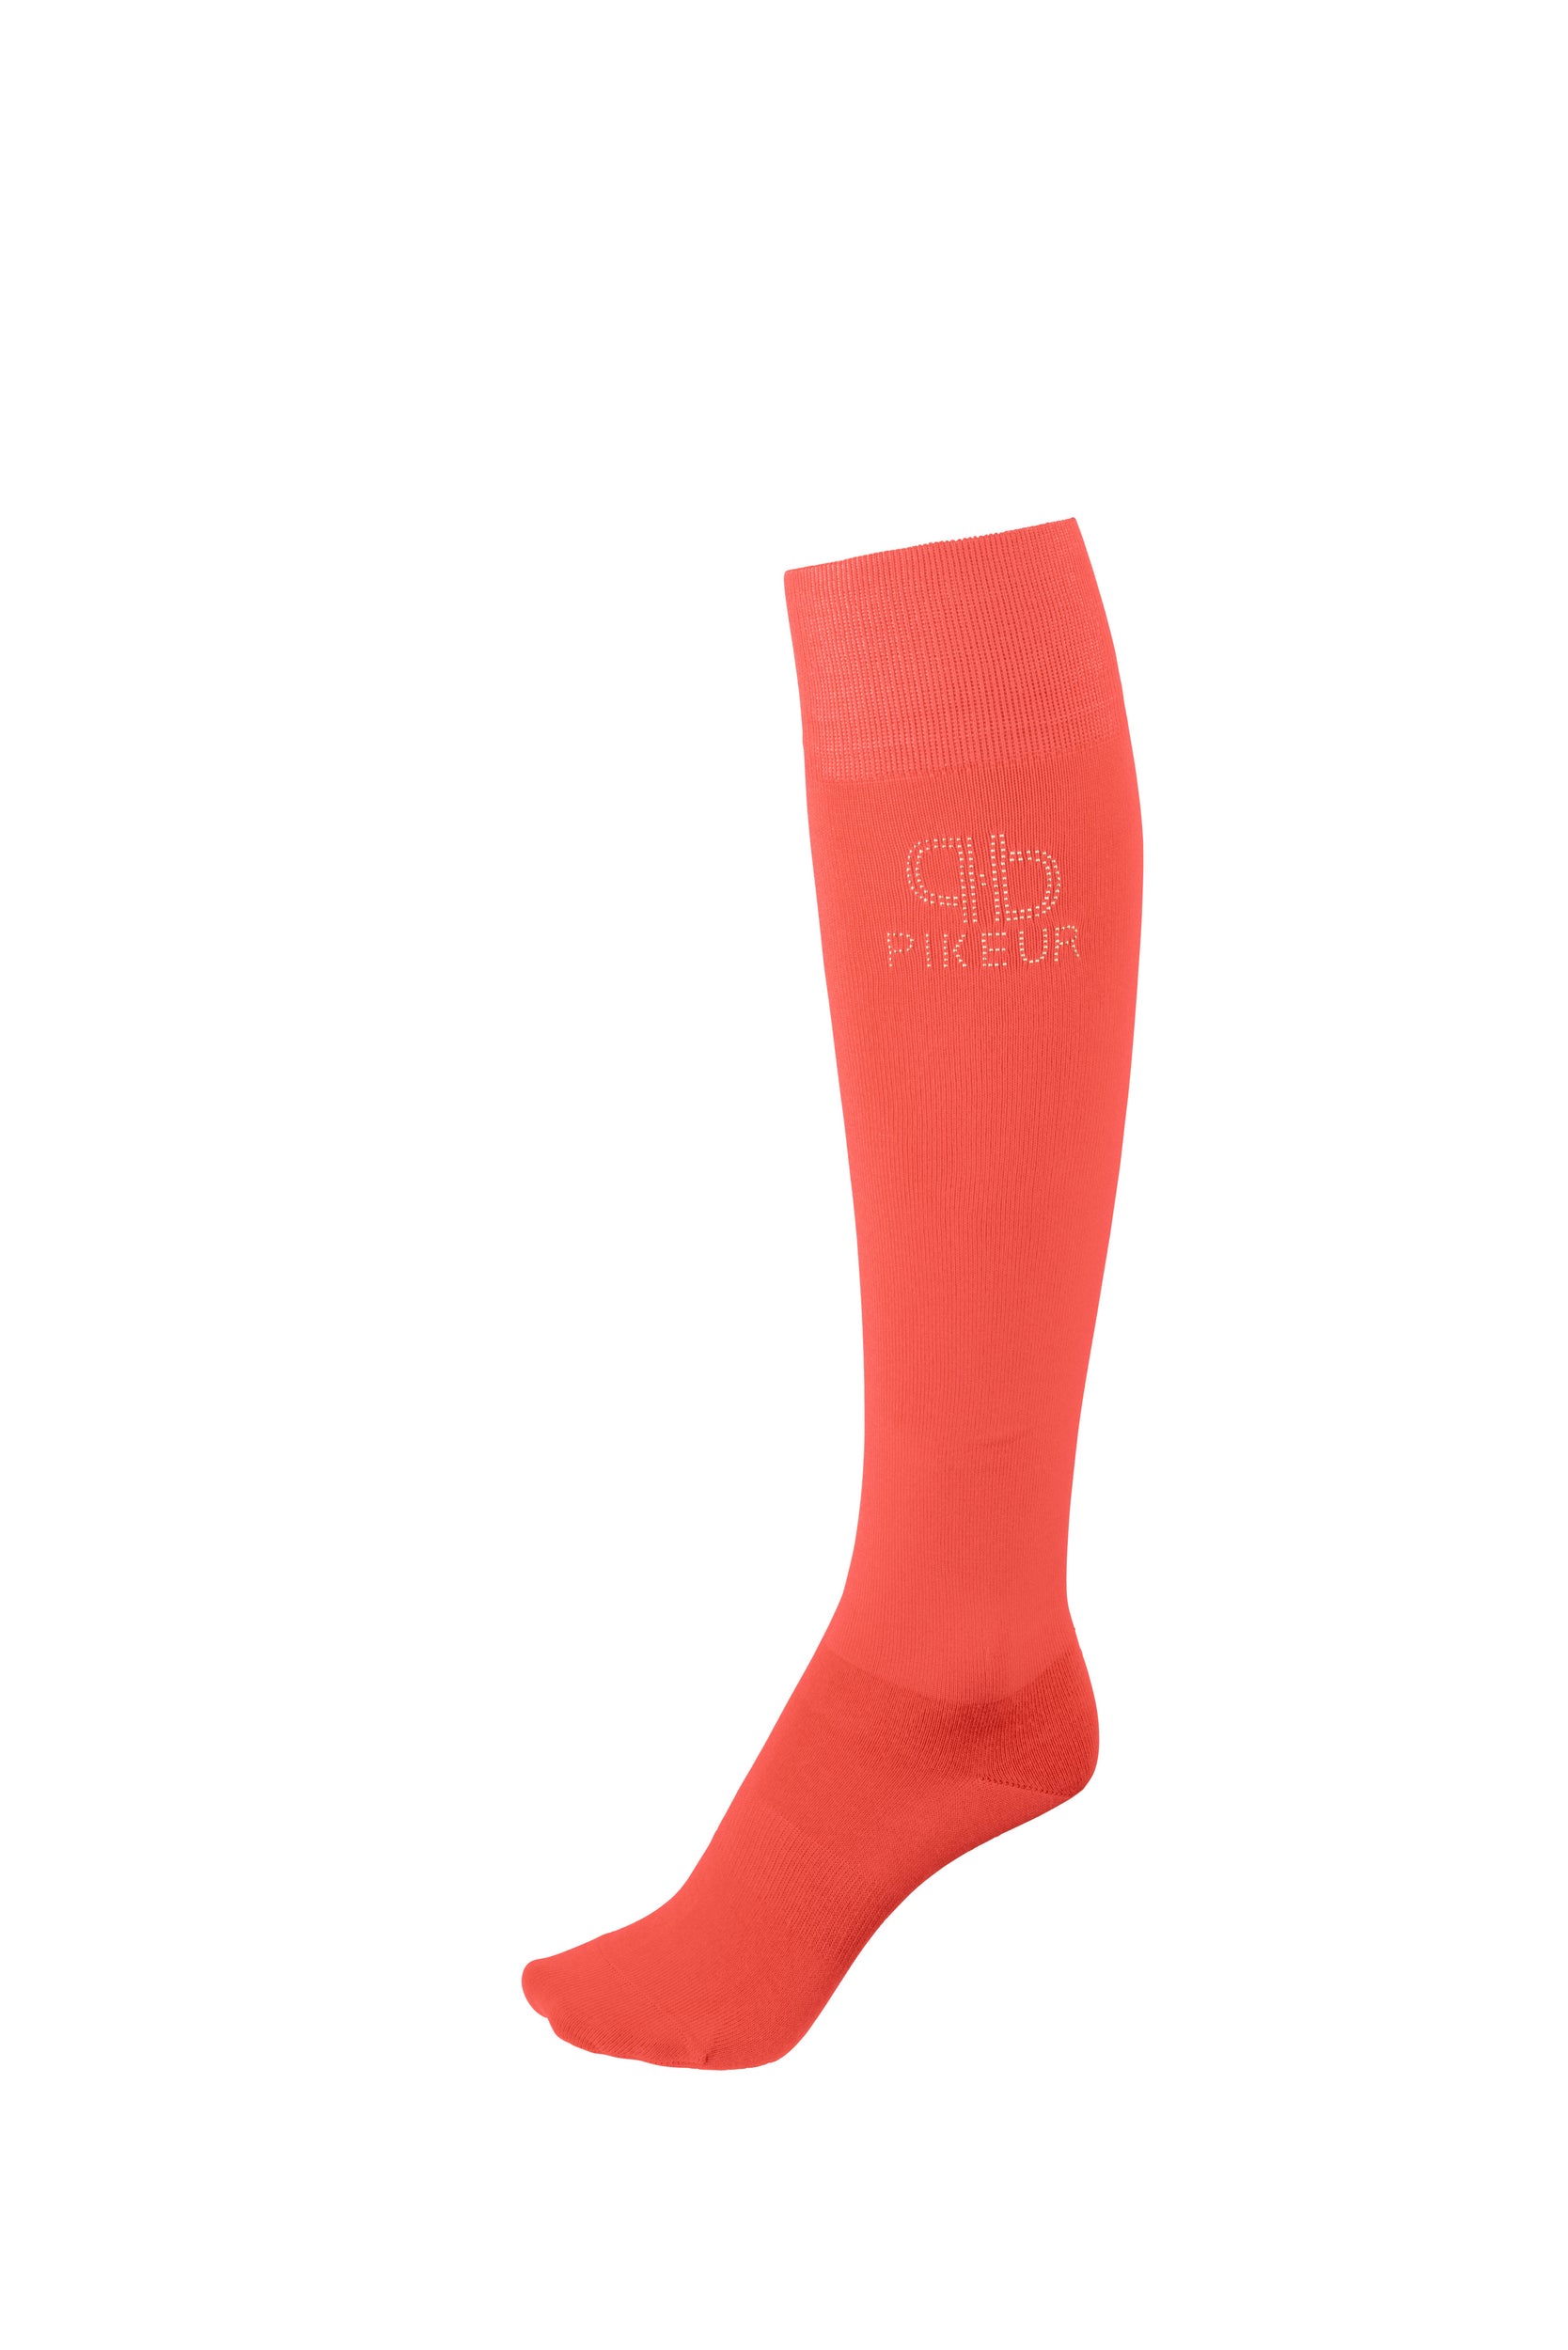 Pikeur long gold stud socks in coral red